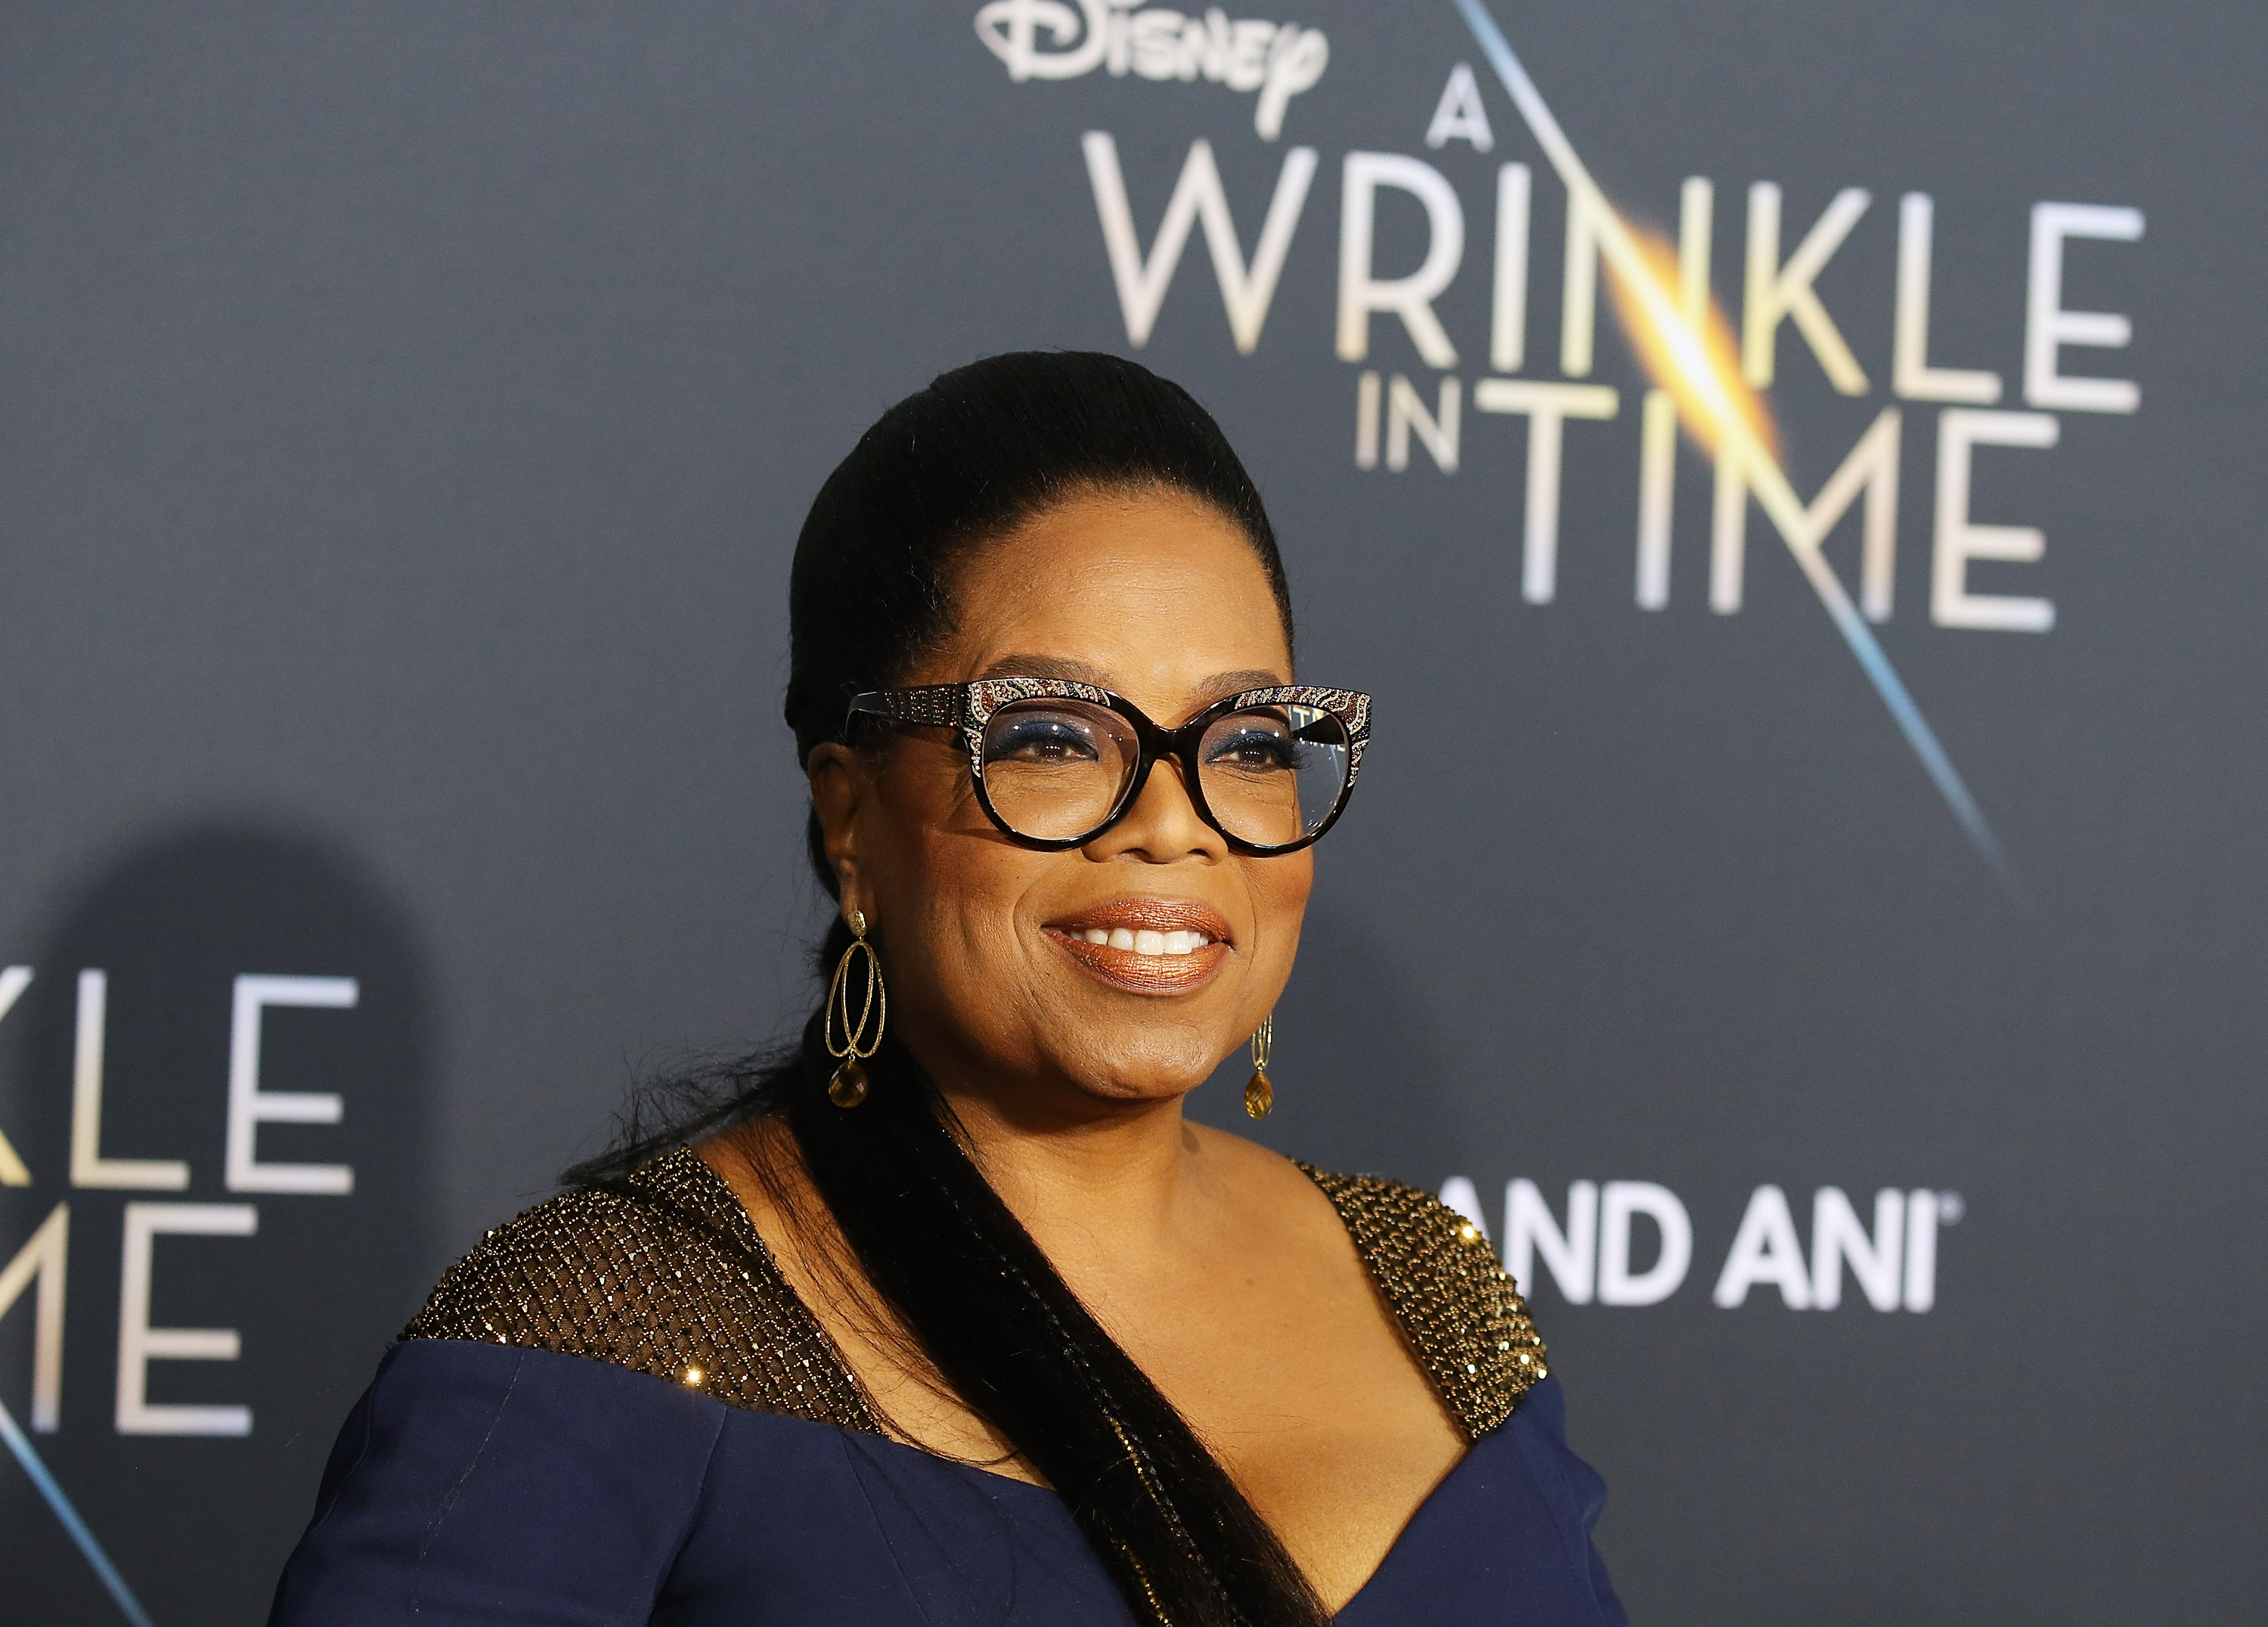 Premiere Of Disney's 'A Wrinkle In Time' - Arrivals